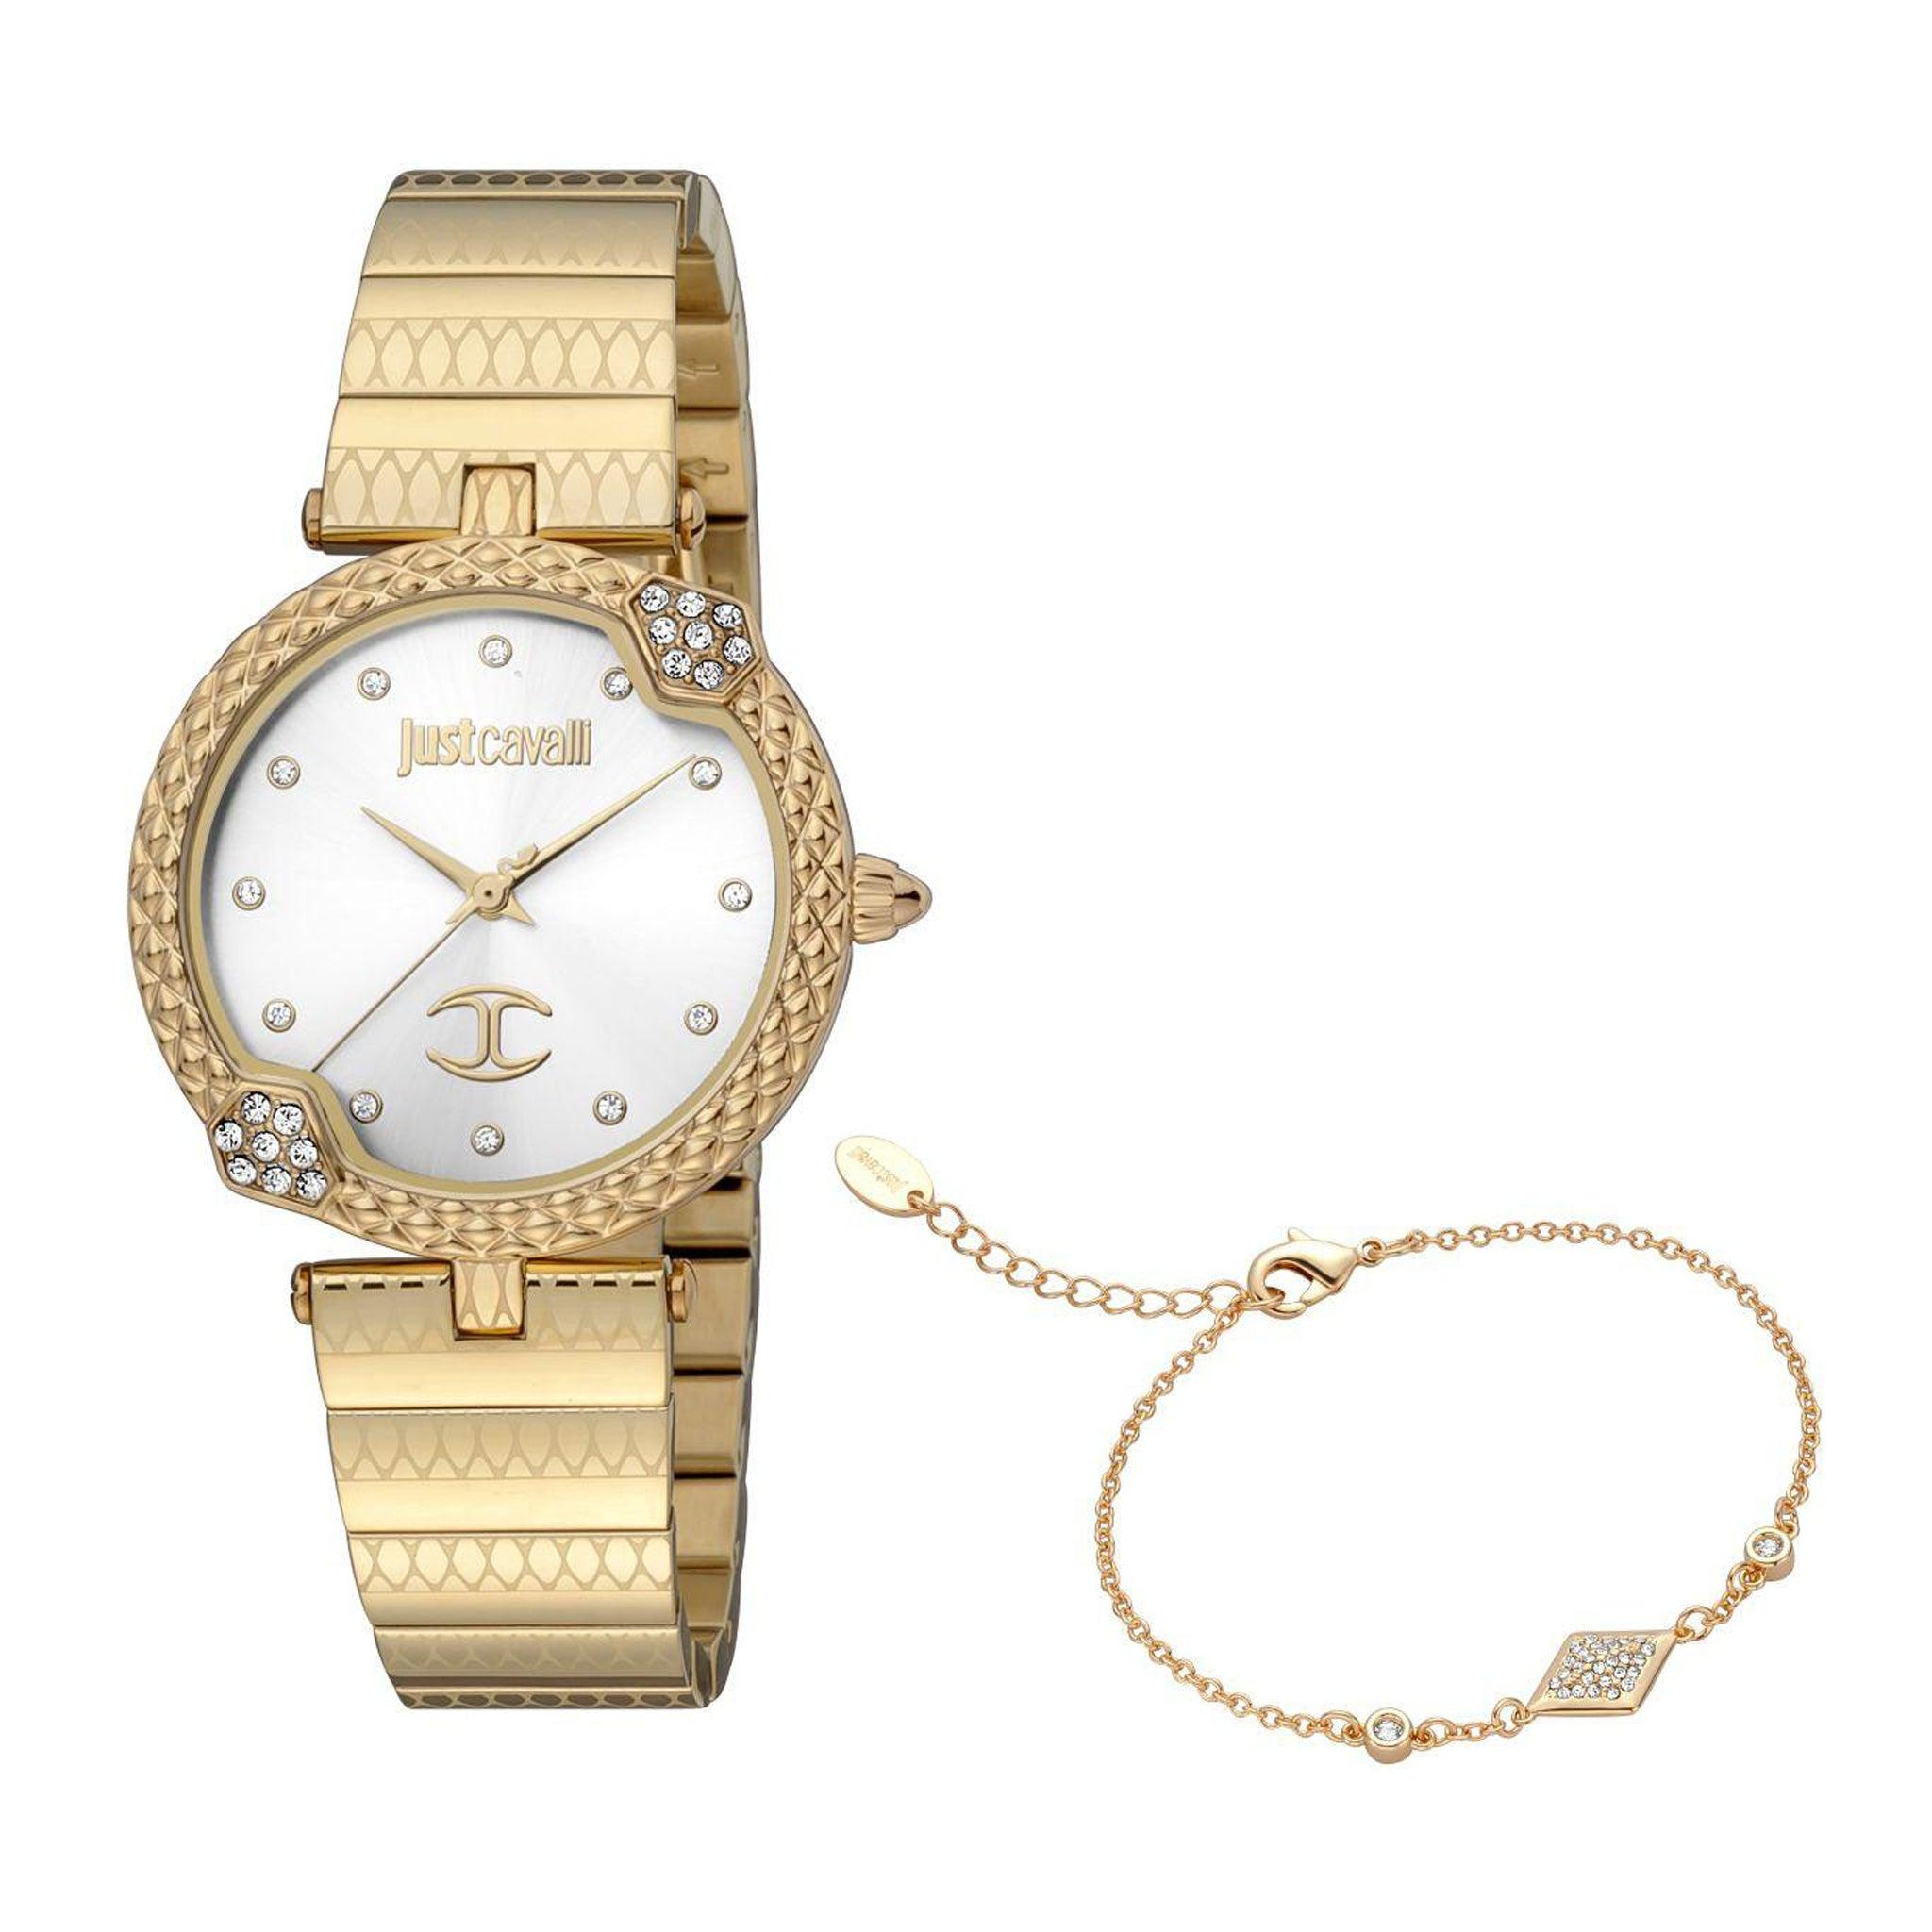 Just Cavalli Women's Gold Stainless Steel Watch With Bracelet - Jc1l197m0065